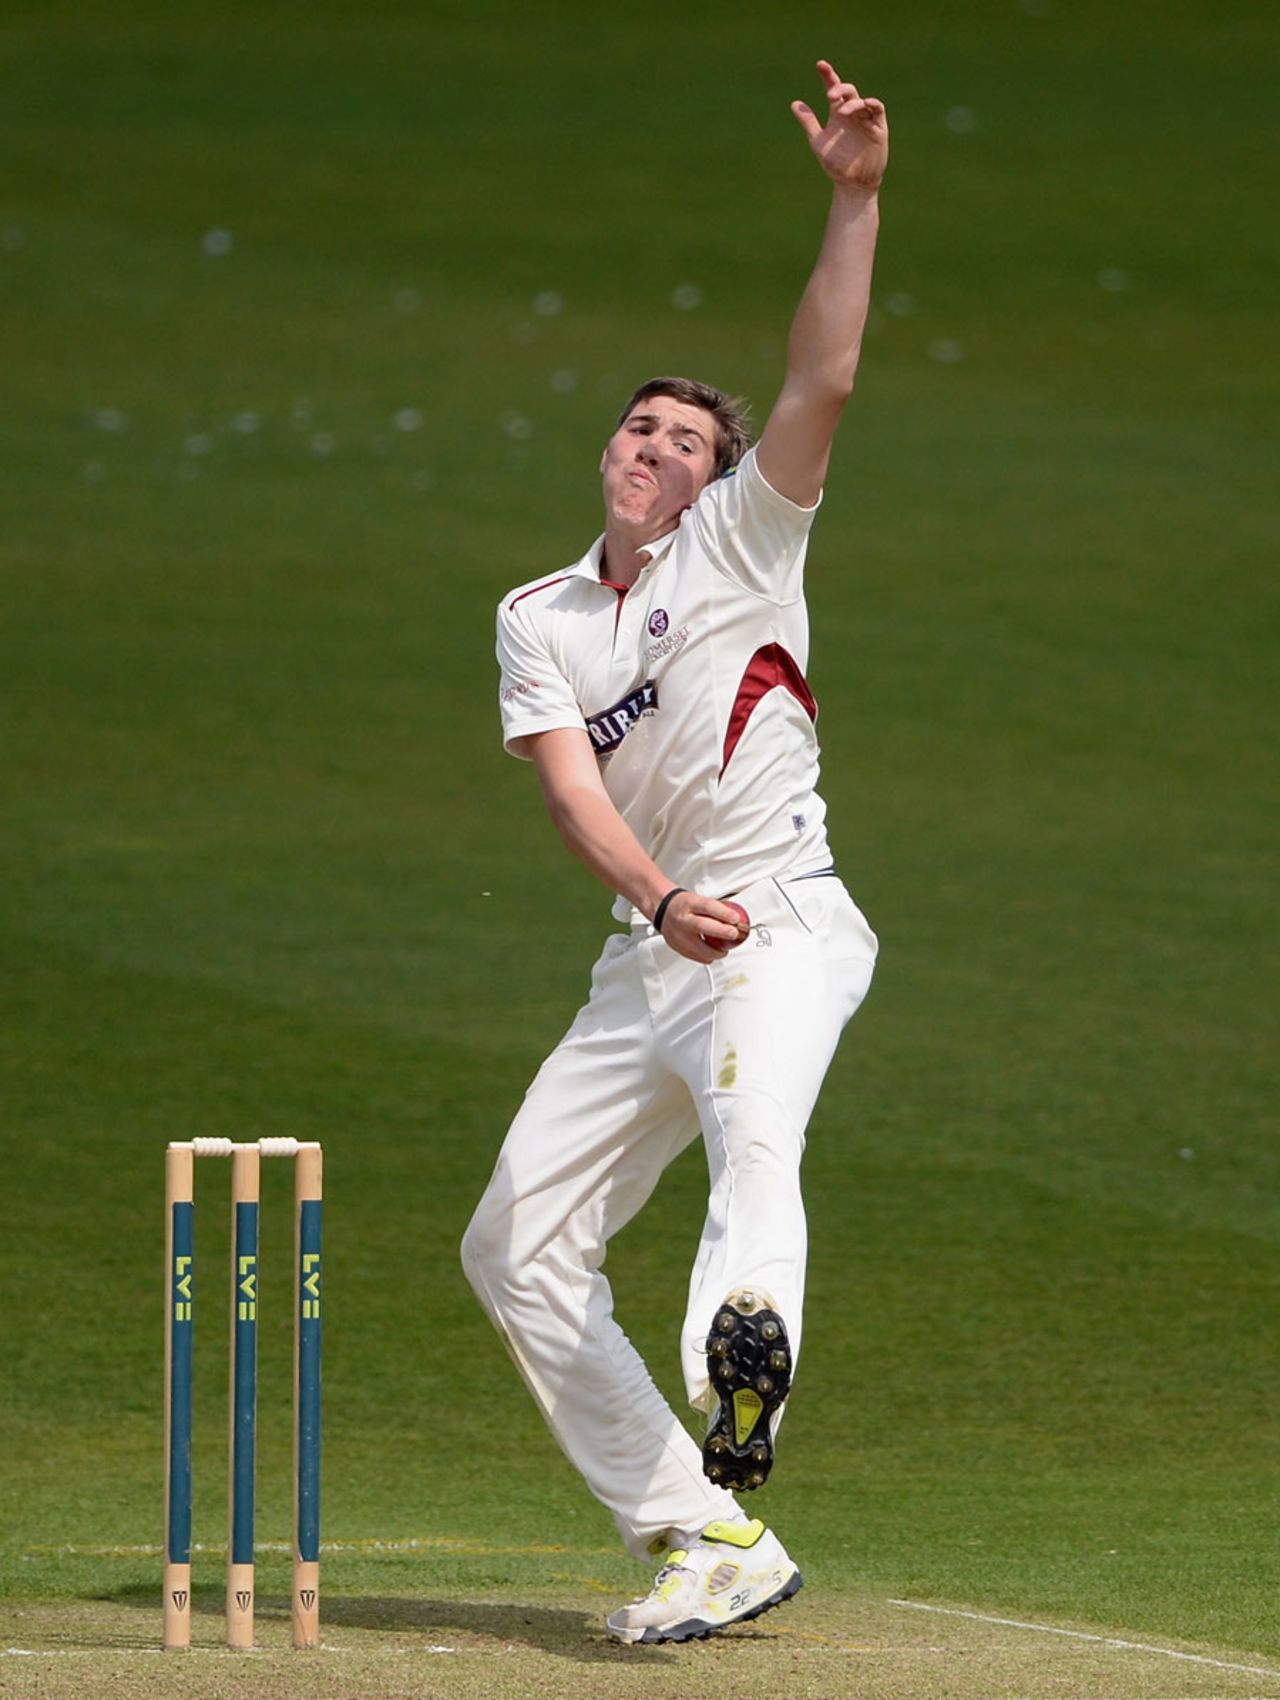 Jamie Overton in his delivery stride, Yorkshire v Somerset, County Championship, Division One, Headingley, 1st day, May 7, 2013